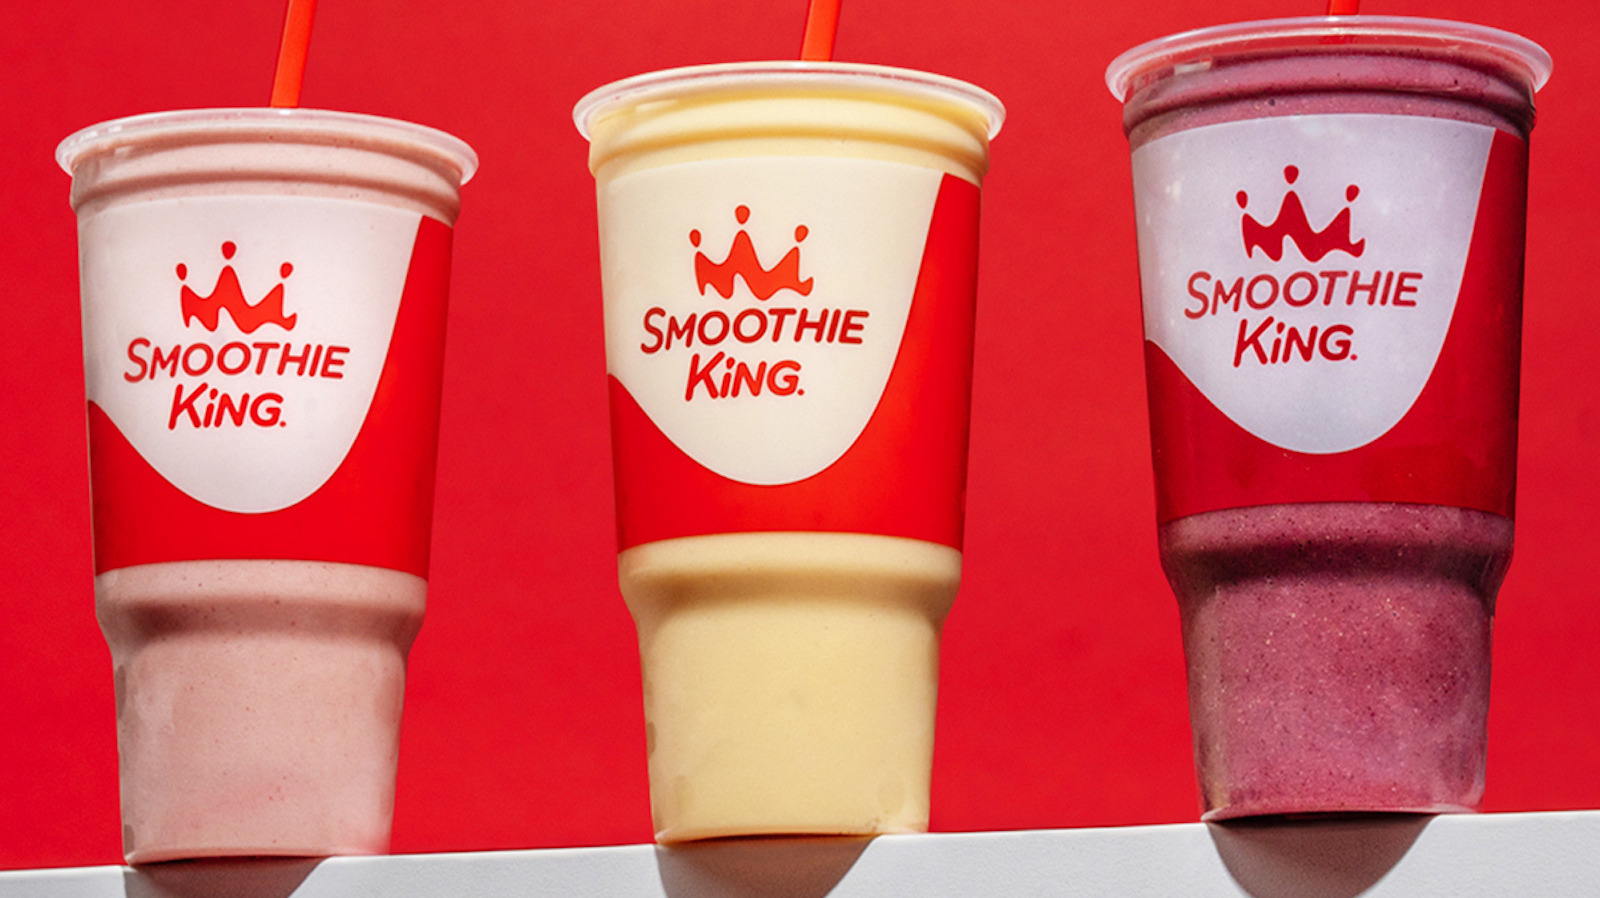 Smoothie King Wrote A Novel With ChatGPT To Celebrate Its Newest Flavor